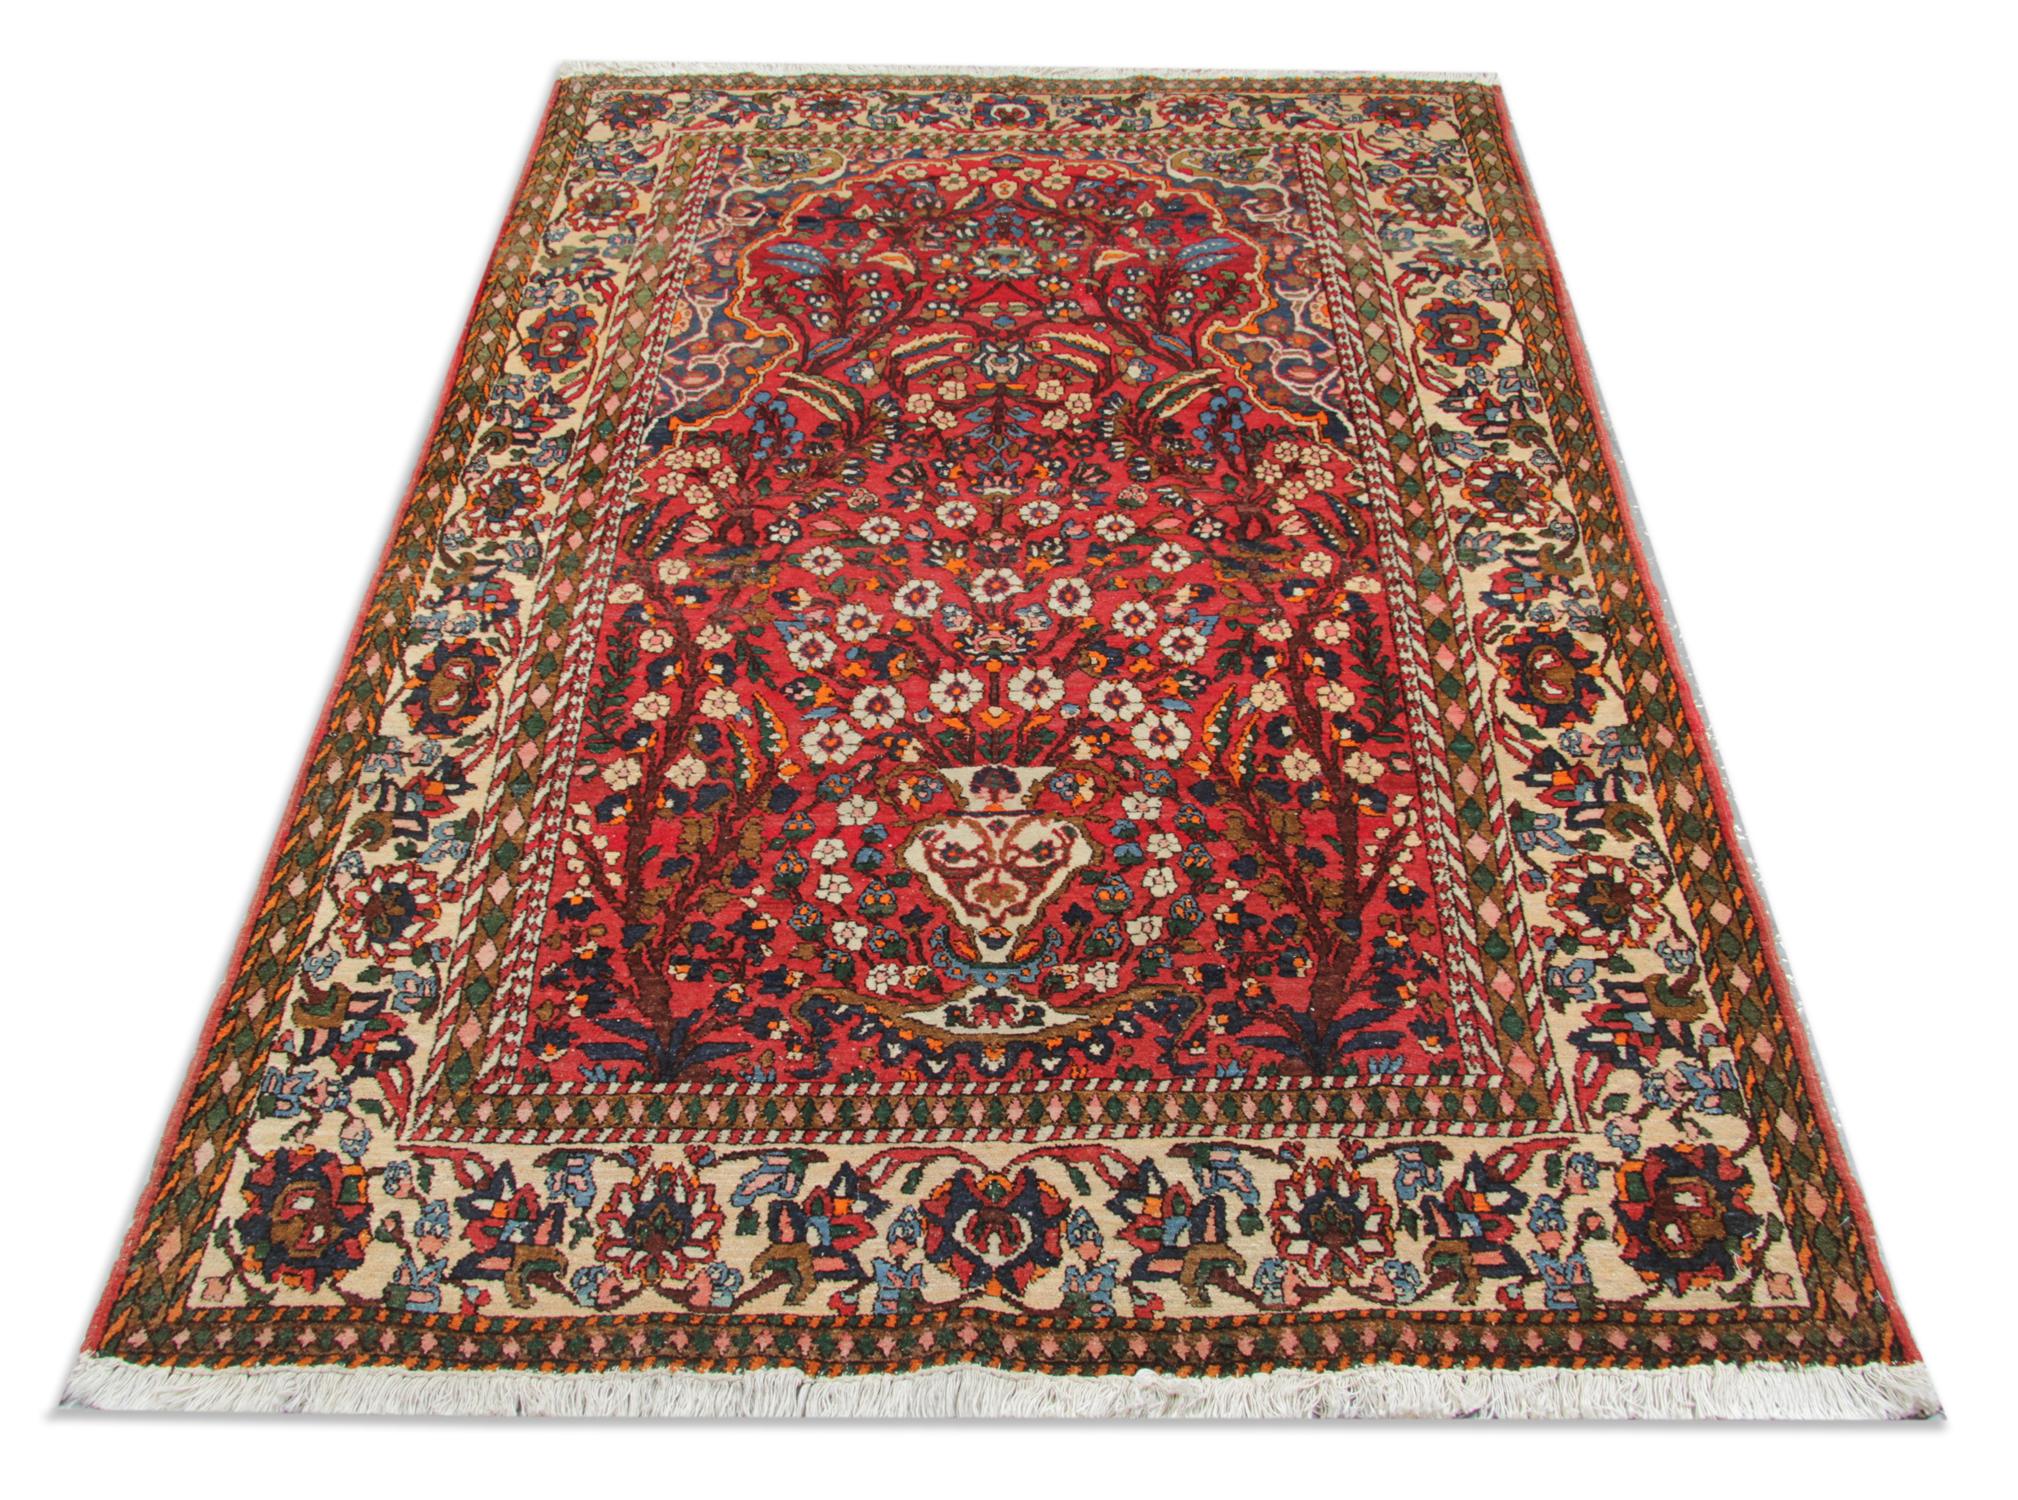 Azerbaijani Traditional Red Wool Carpet Handknotted Orienal Antique Area Rug For Sale